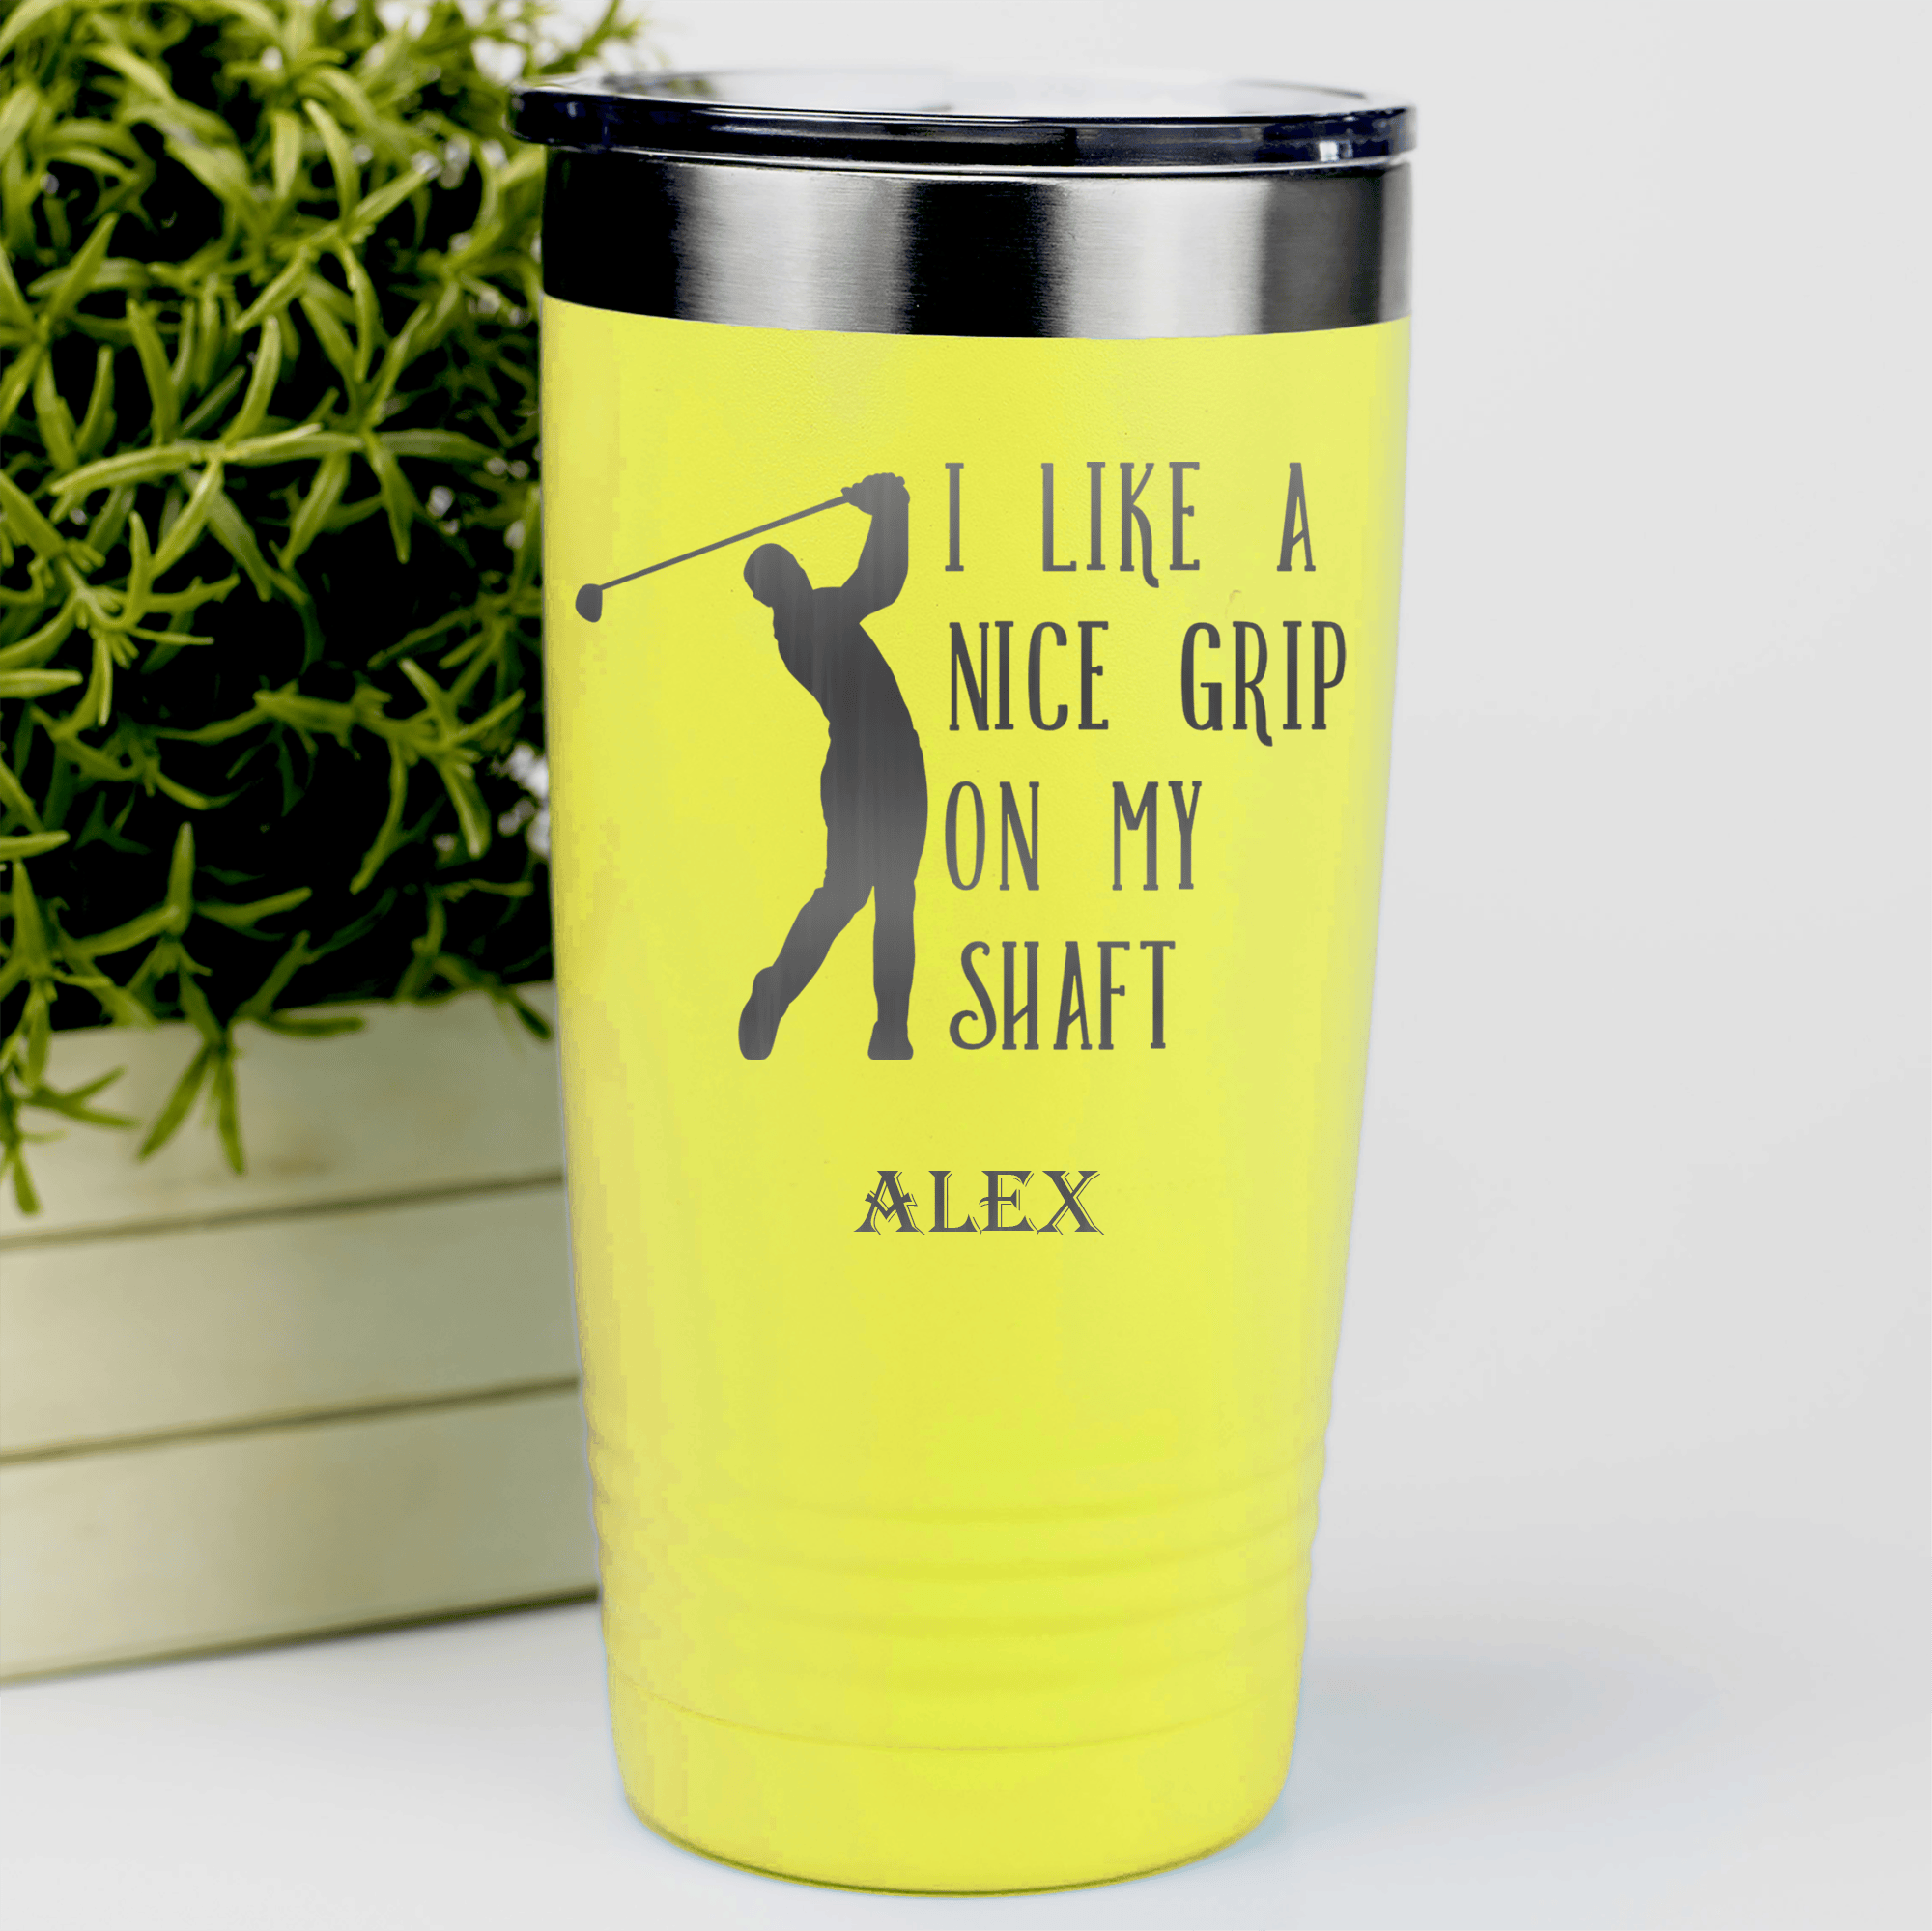 Yellow Golf Tumbler With Grip On My Shaft Design